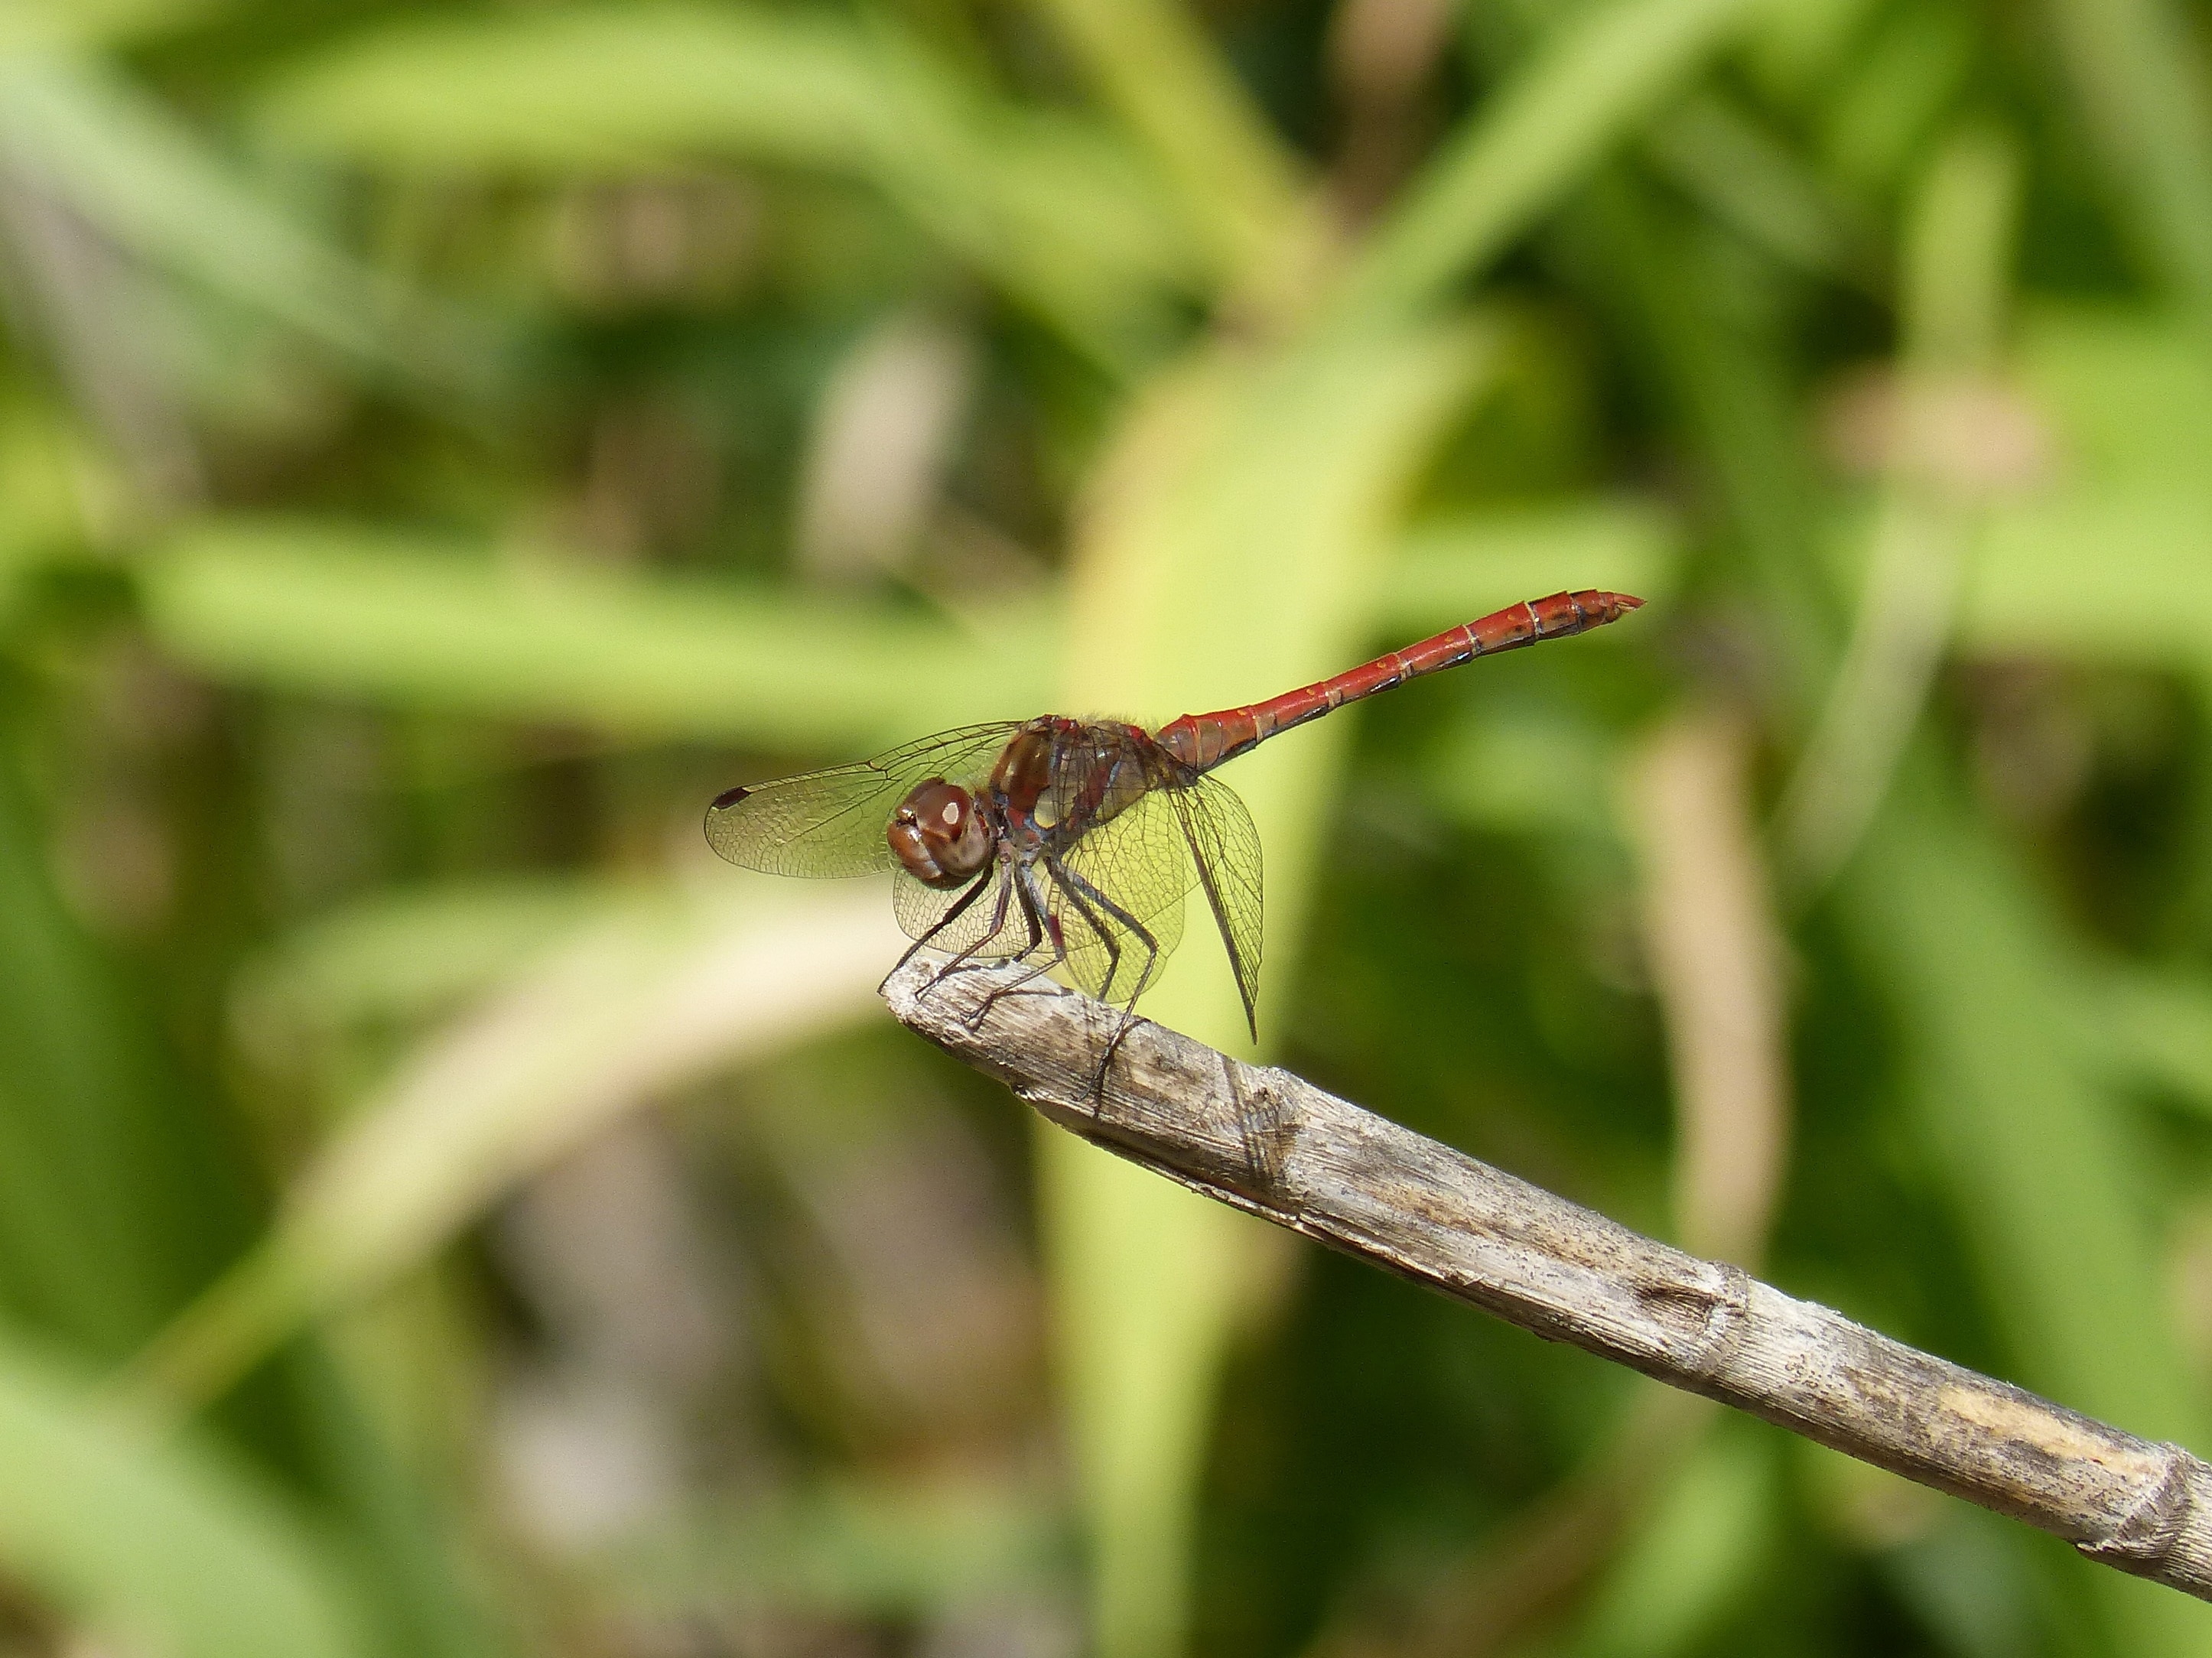 Dragonfly, Cane, Red Dragonfly, insect, animal themes